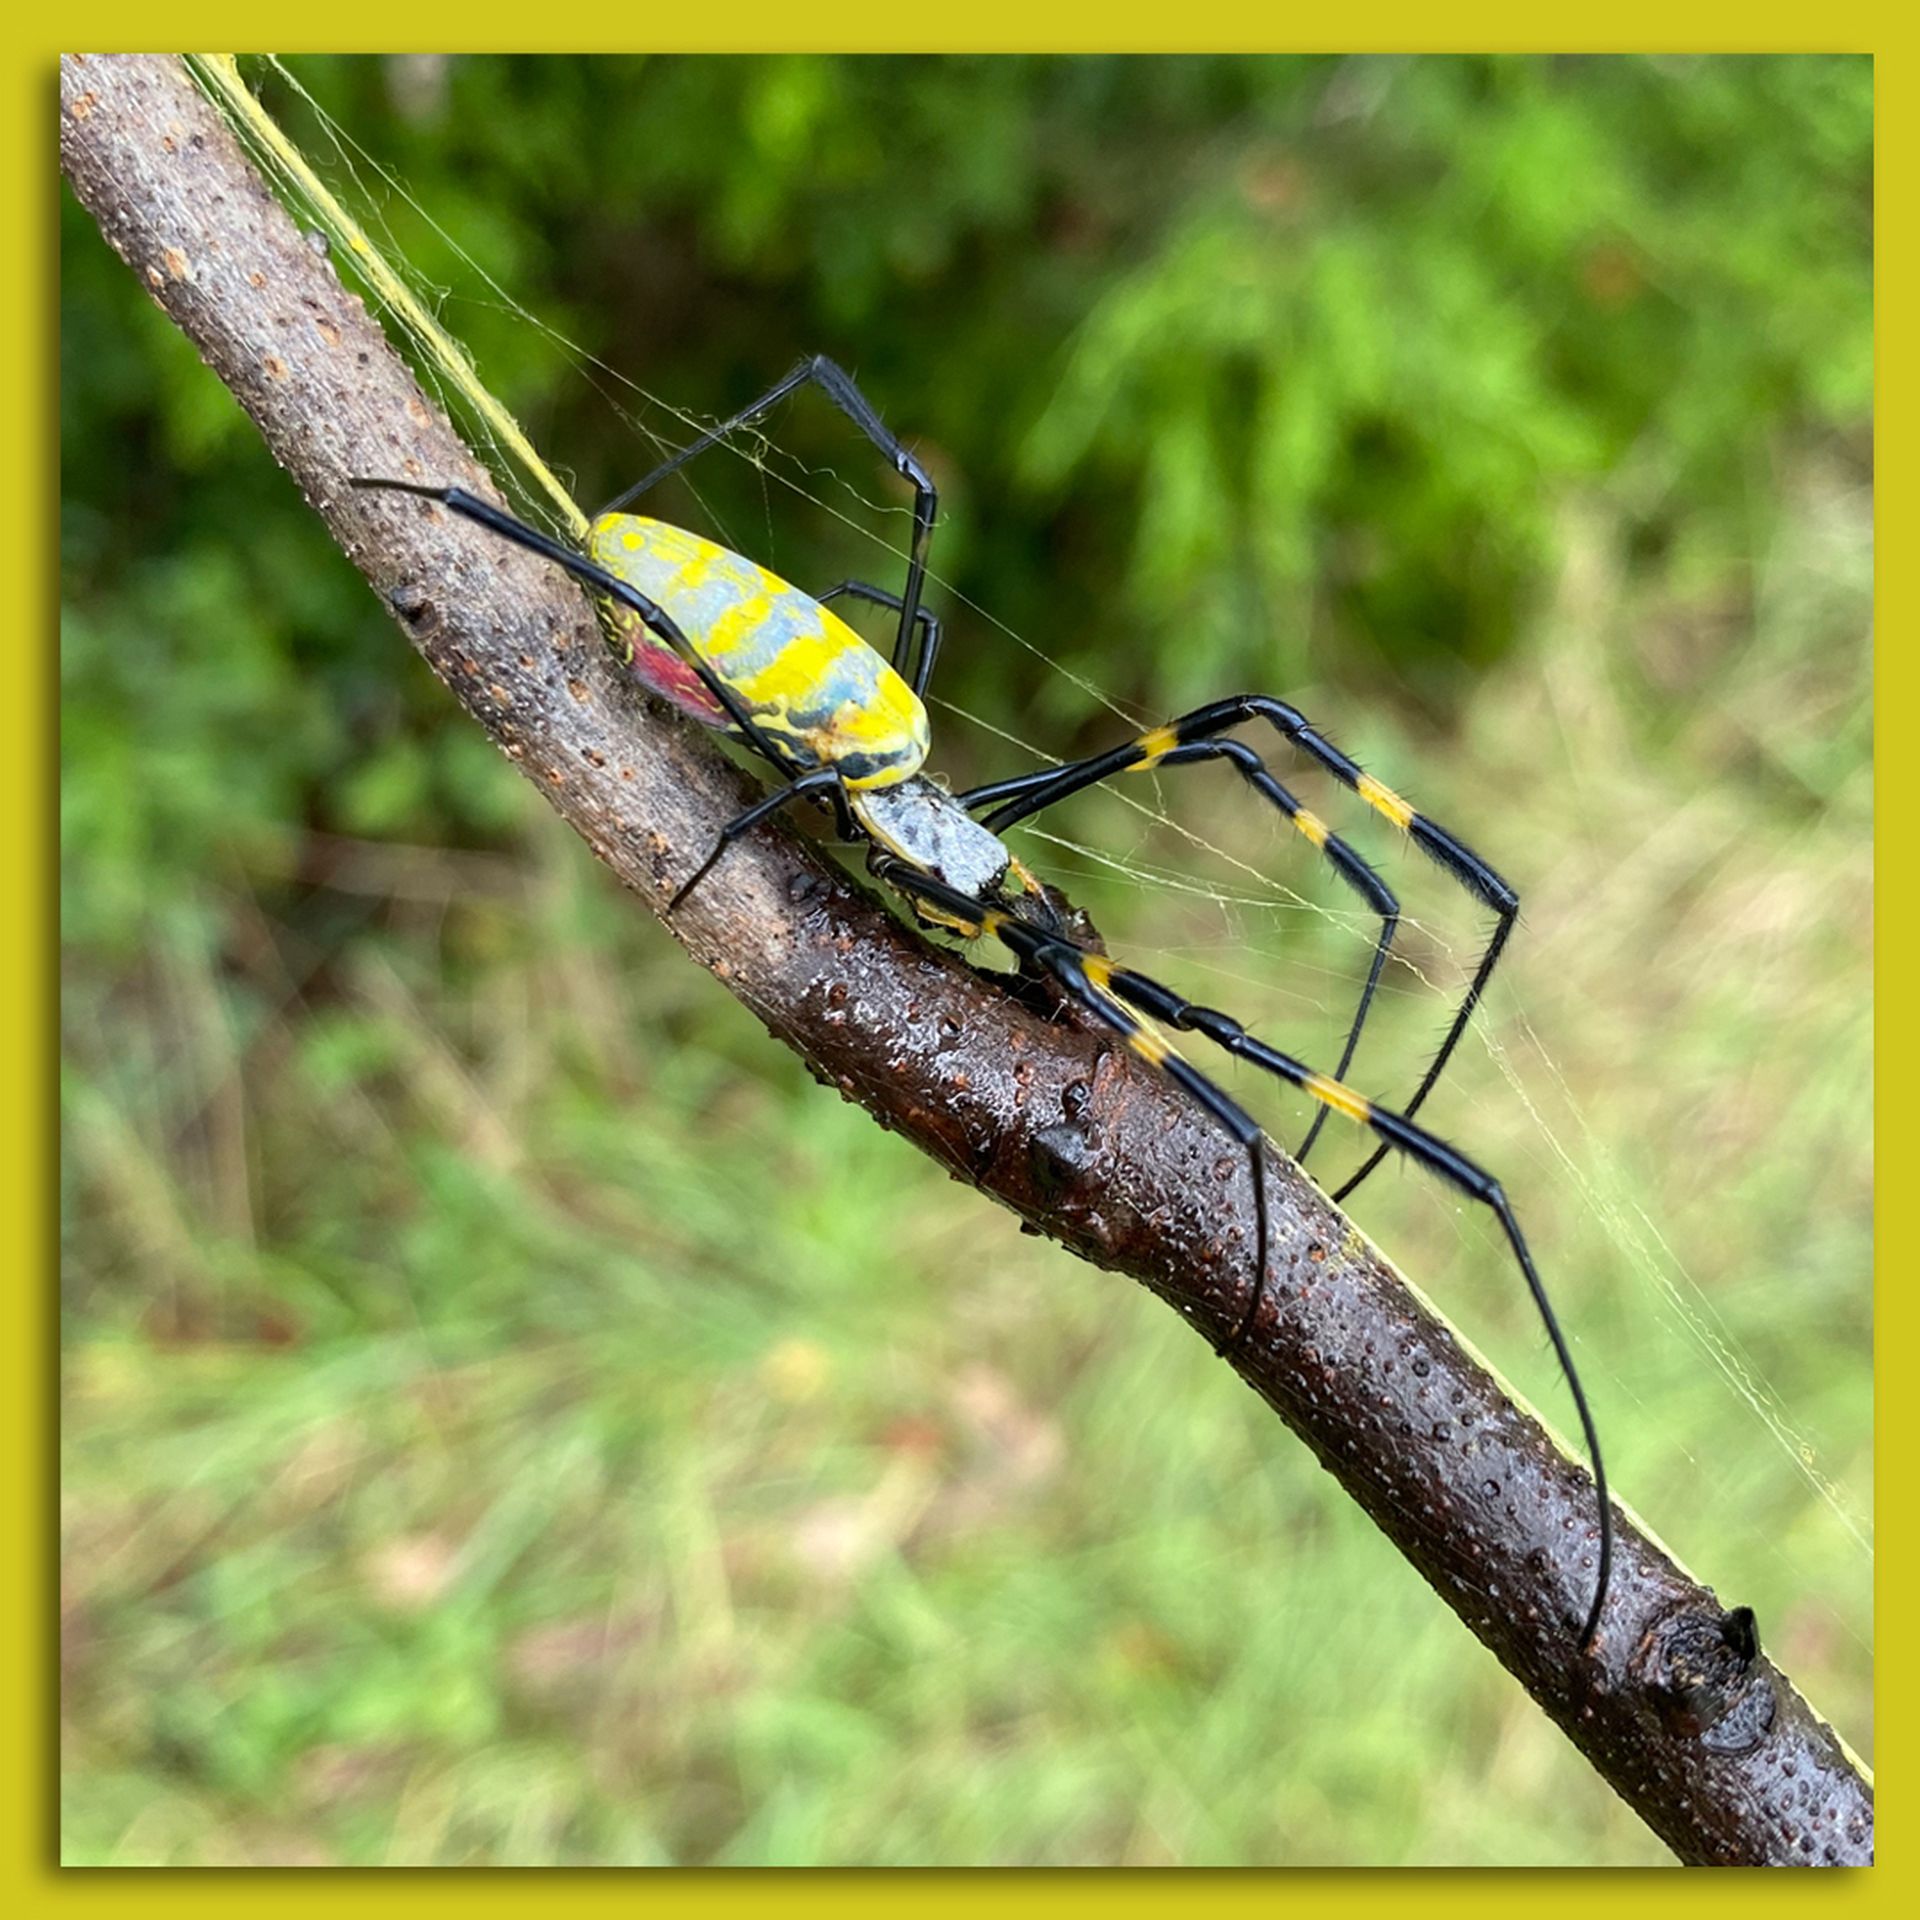 A creepy, large yellow and black spider with a bulbous, bright yellow body is crawling along a tree branch.